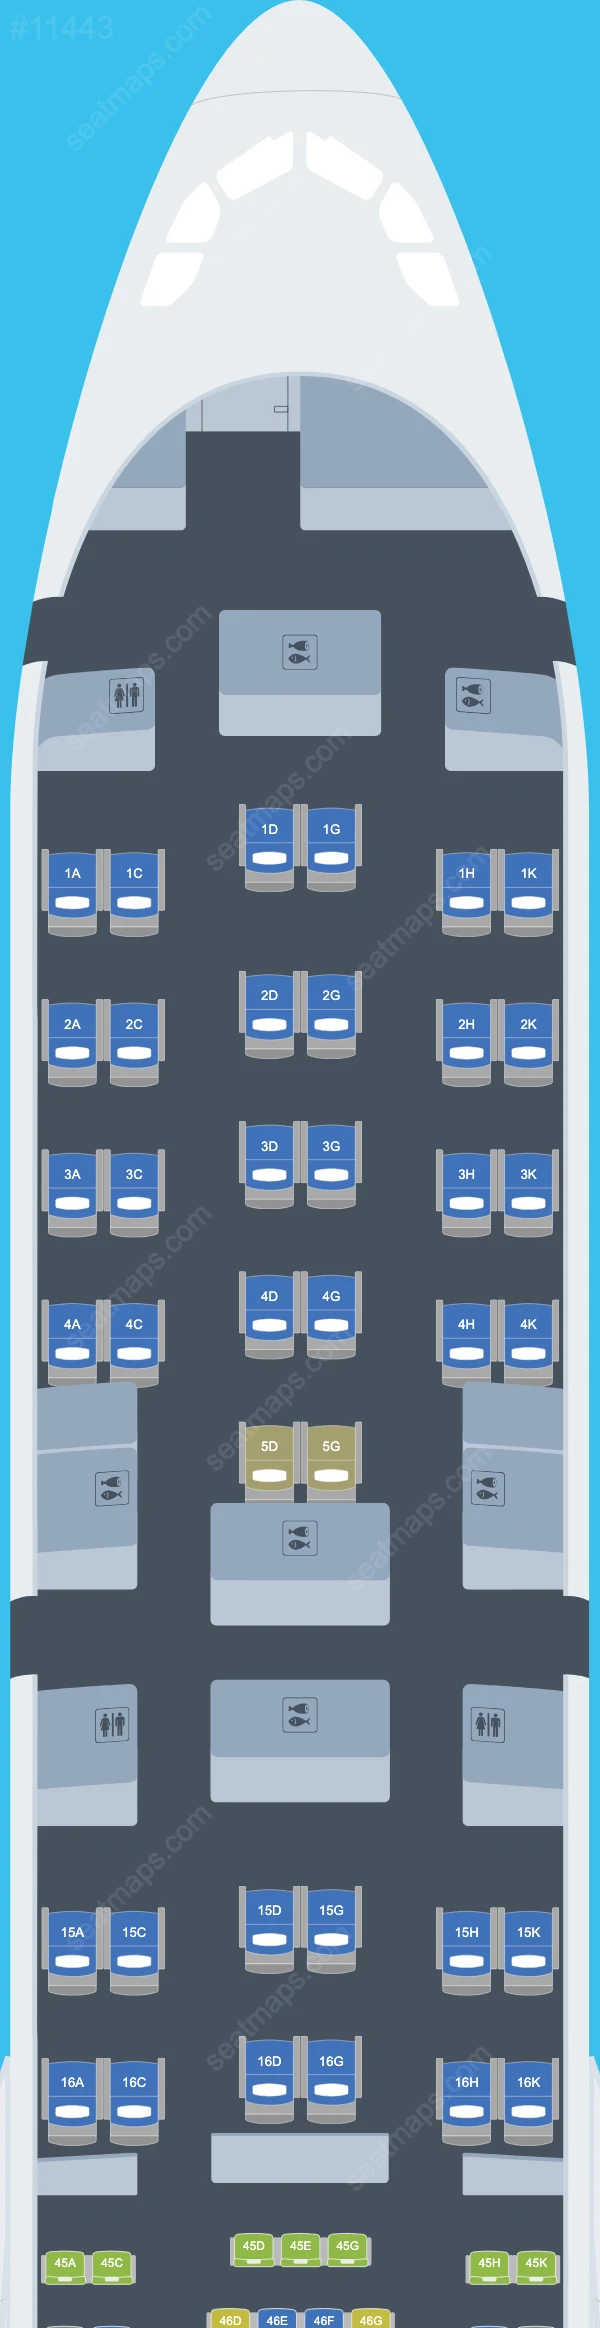 USC Airbus A340 aircraft seat map  A340-300